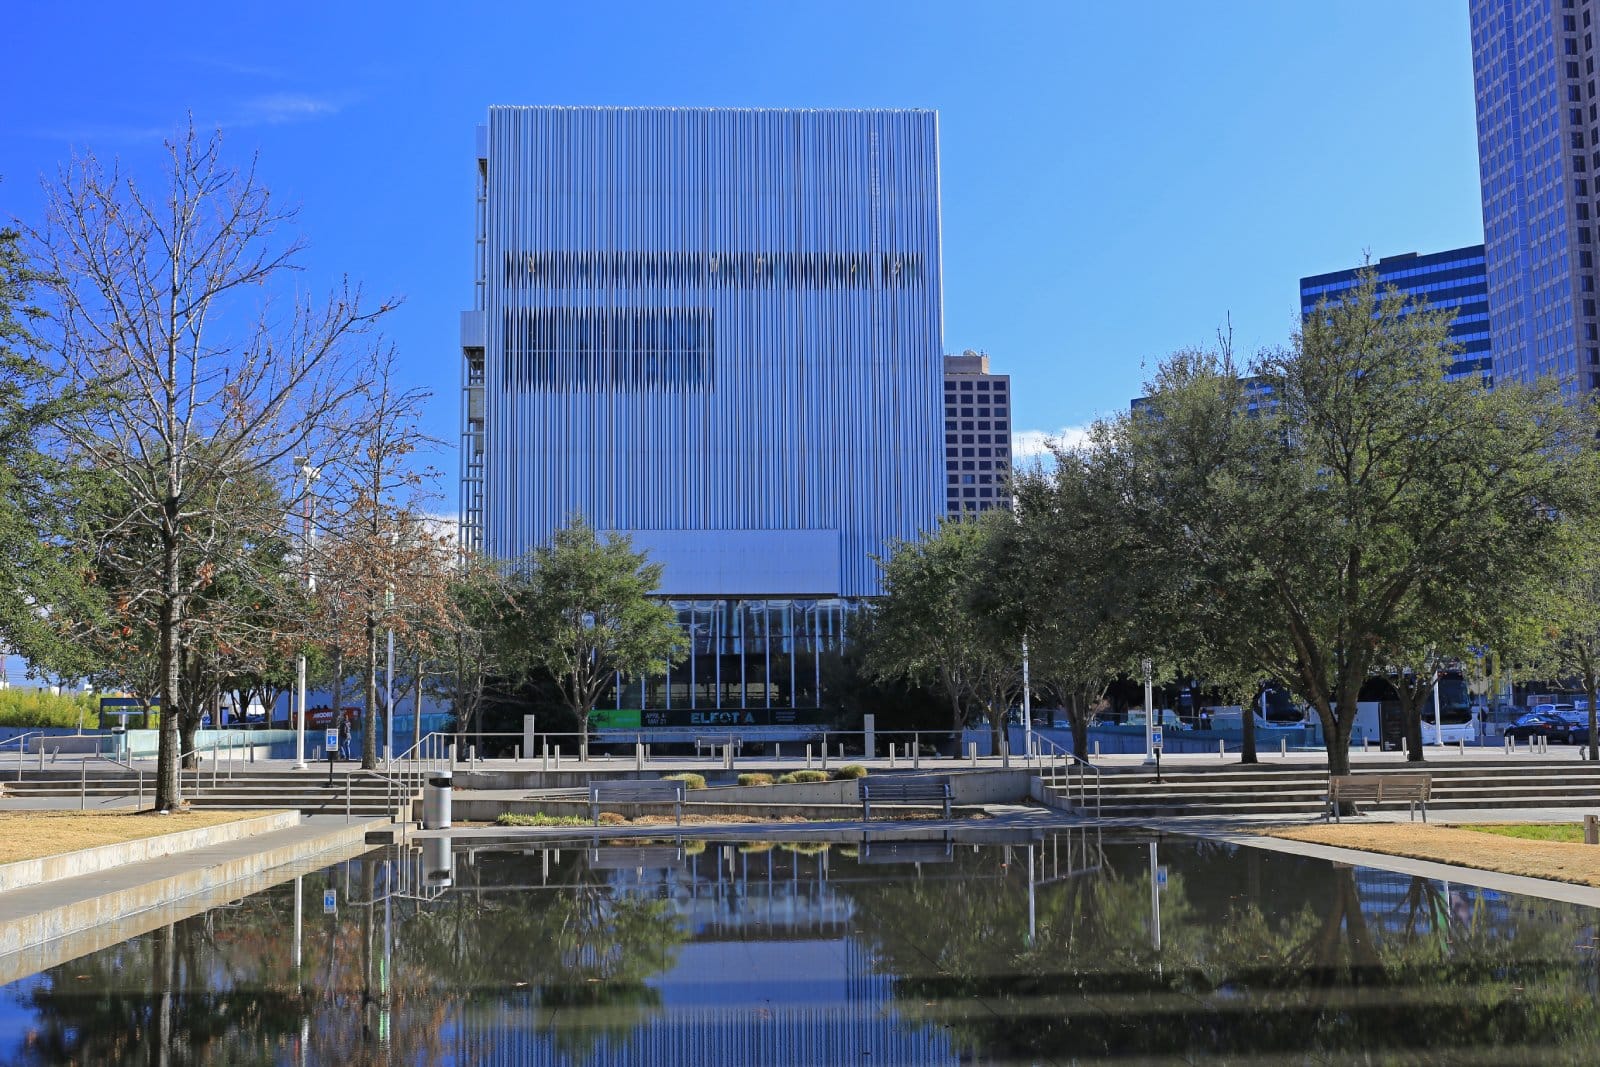 <p><span>Dallas boasts an impressive arts district, the largest in the nation, featuring the Dallas Museum of Art, Nasher Sculpture Center, and more. Many museums offer free admission, making it a cultural feast for art lovers.</span></p>